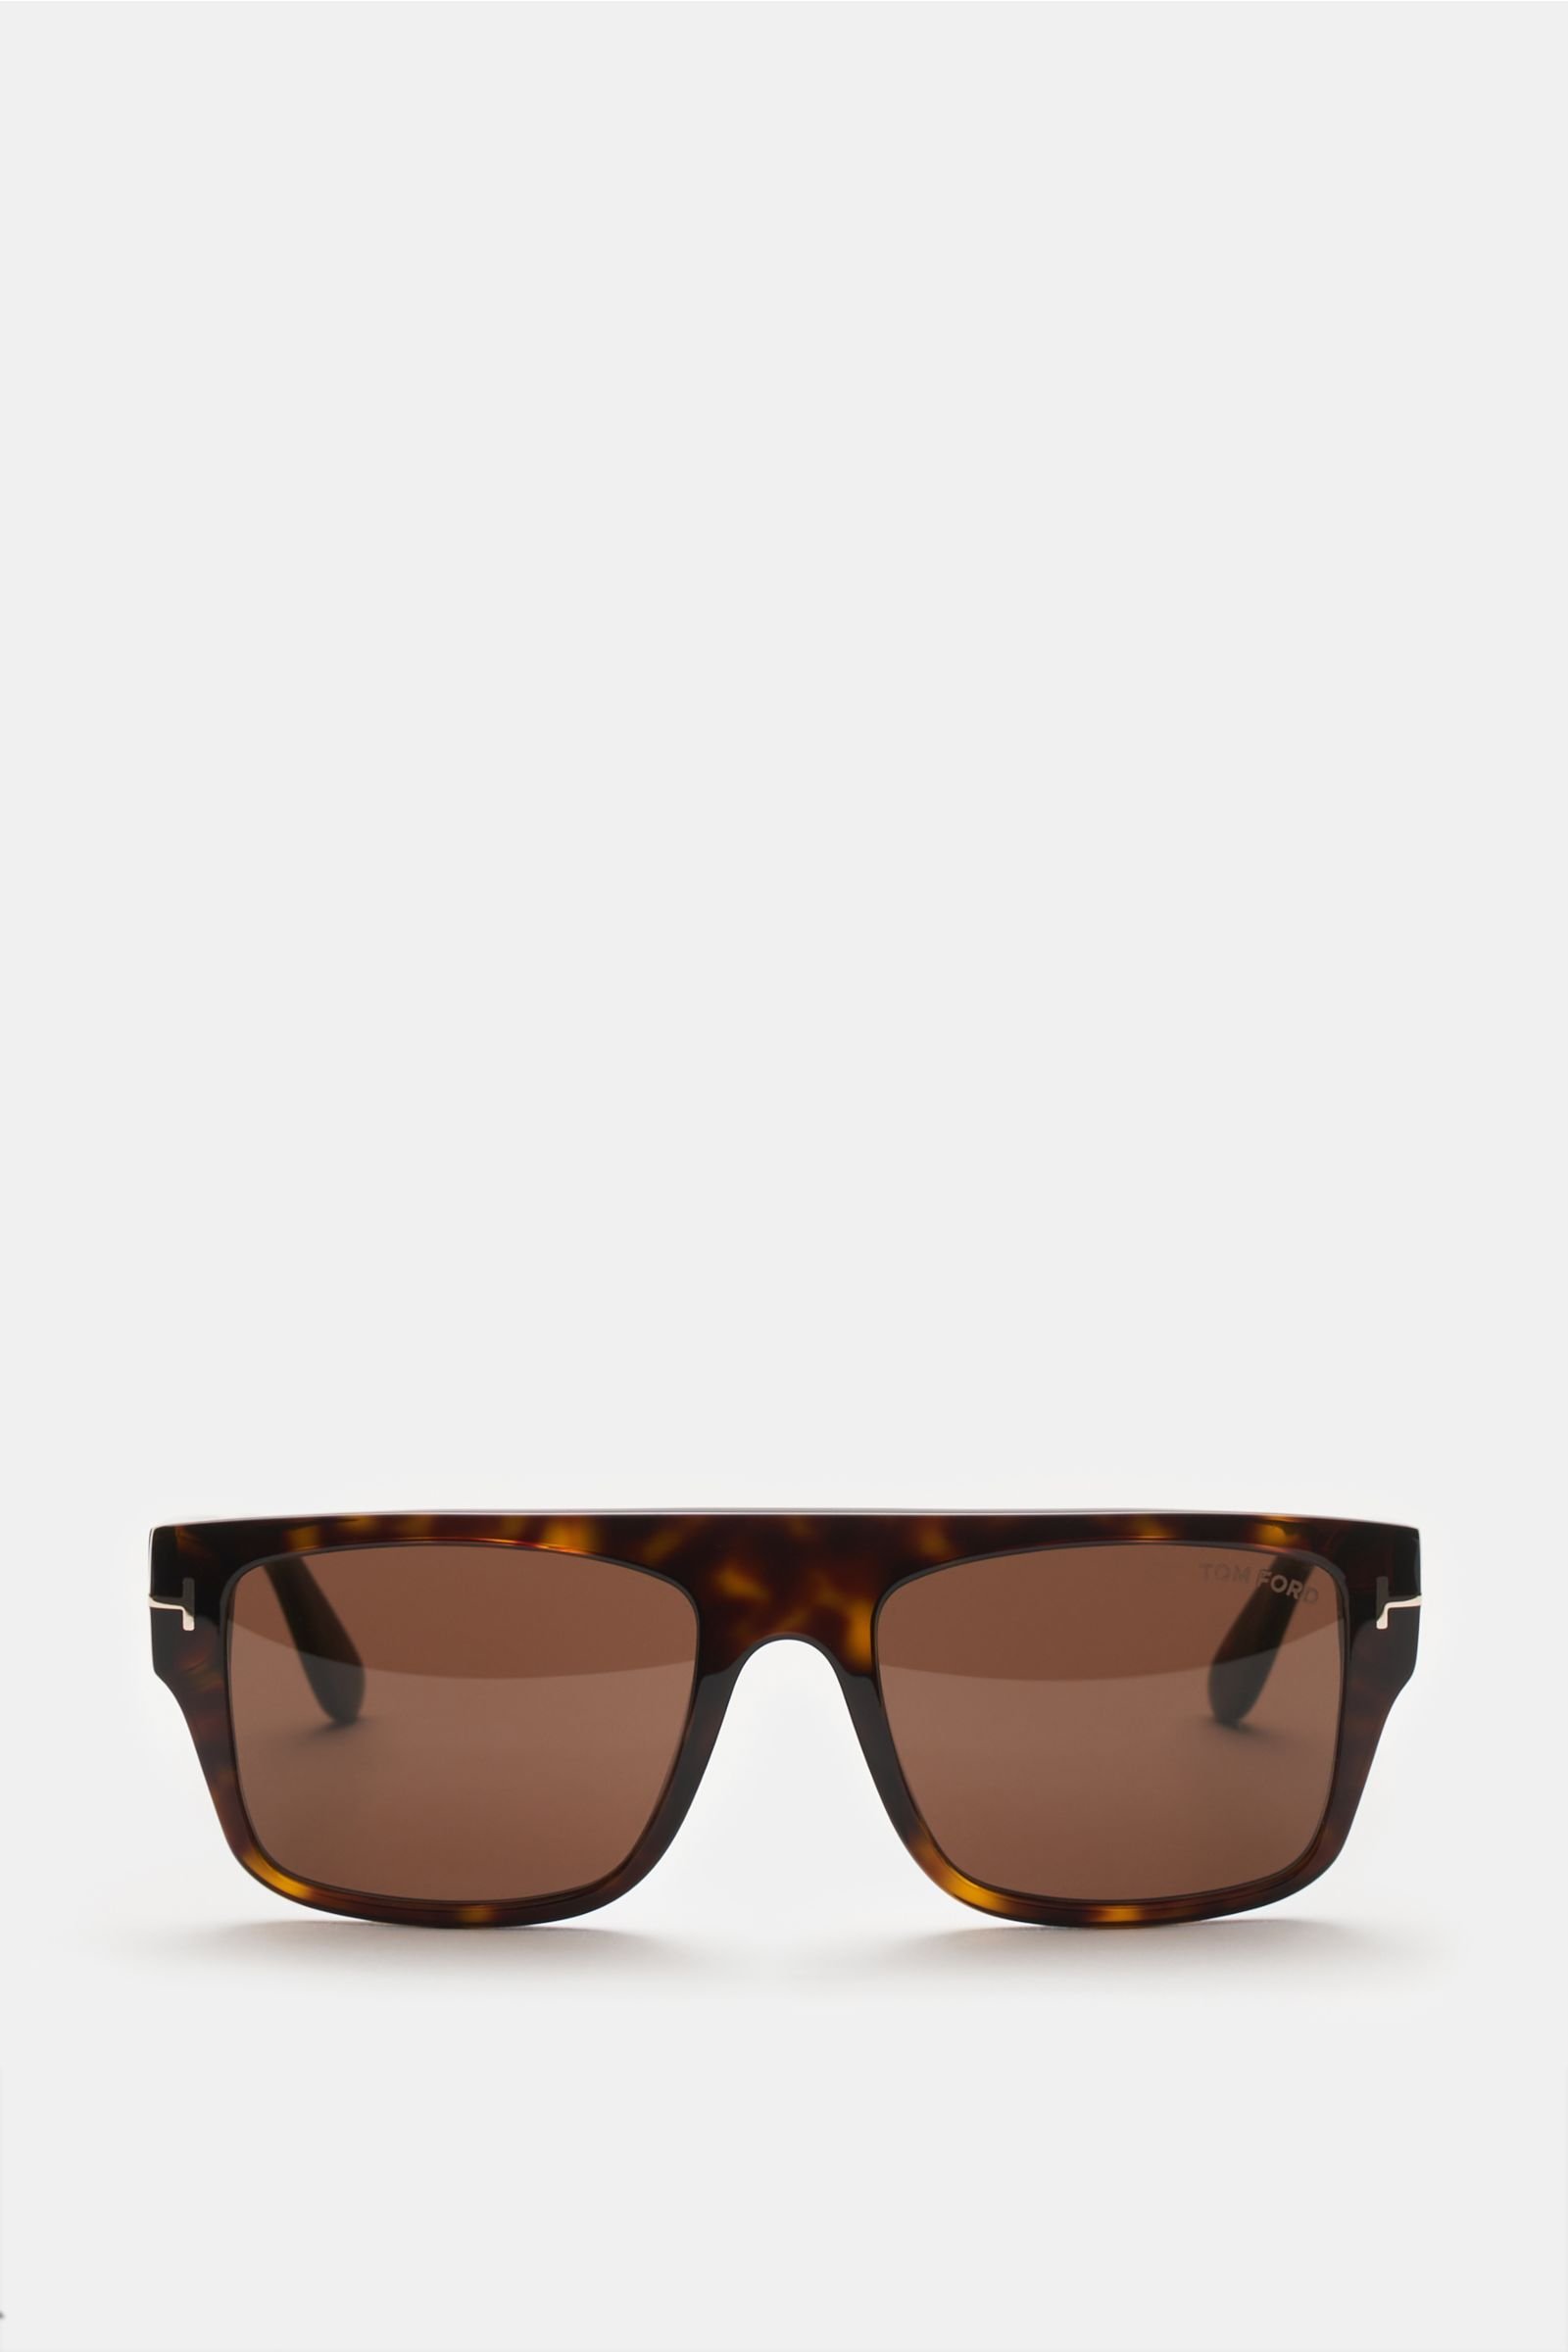 Sunglasses 'Dunning' dark brown patterned/brown